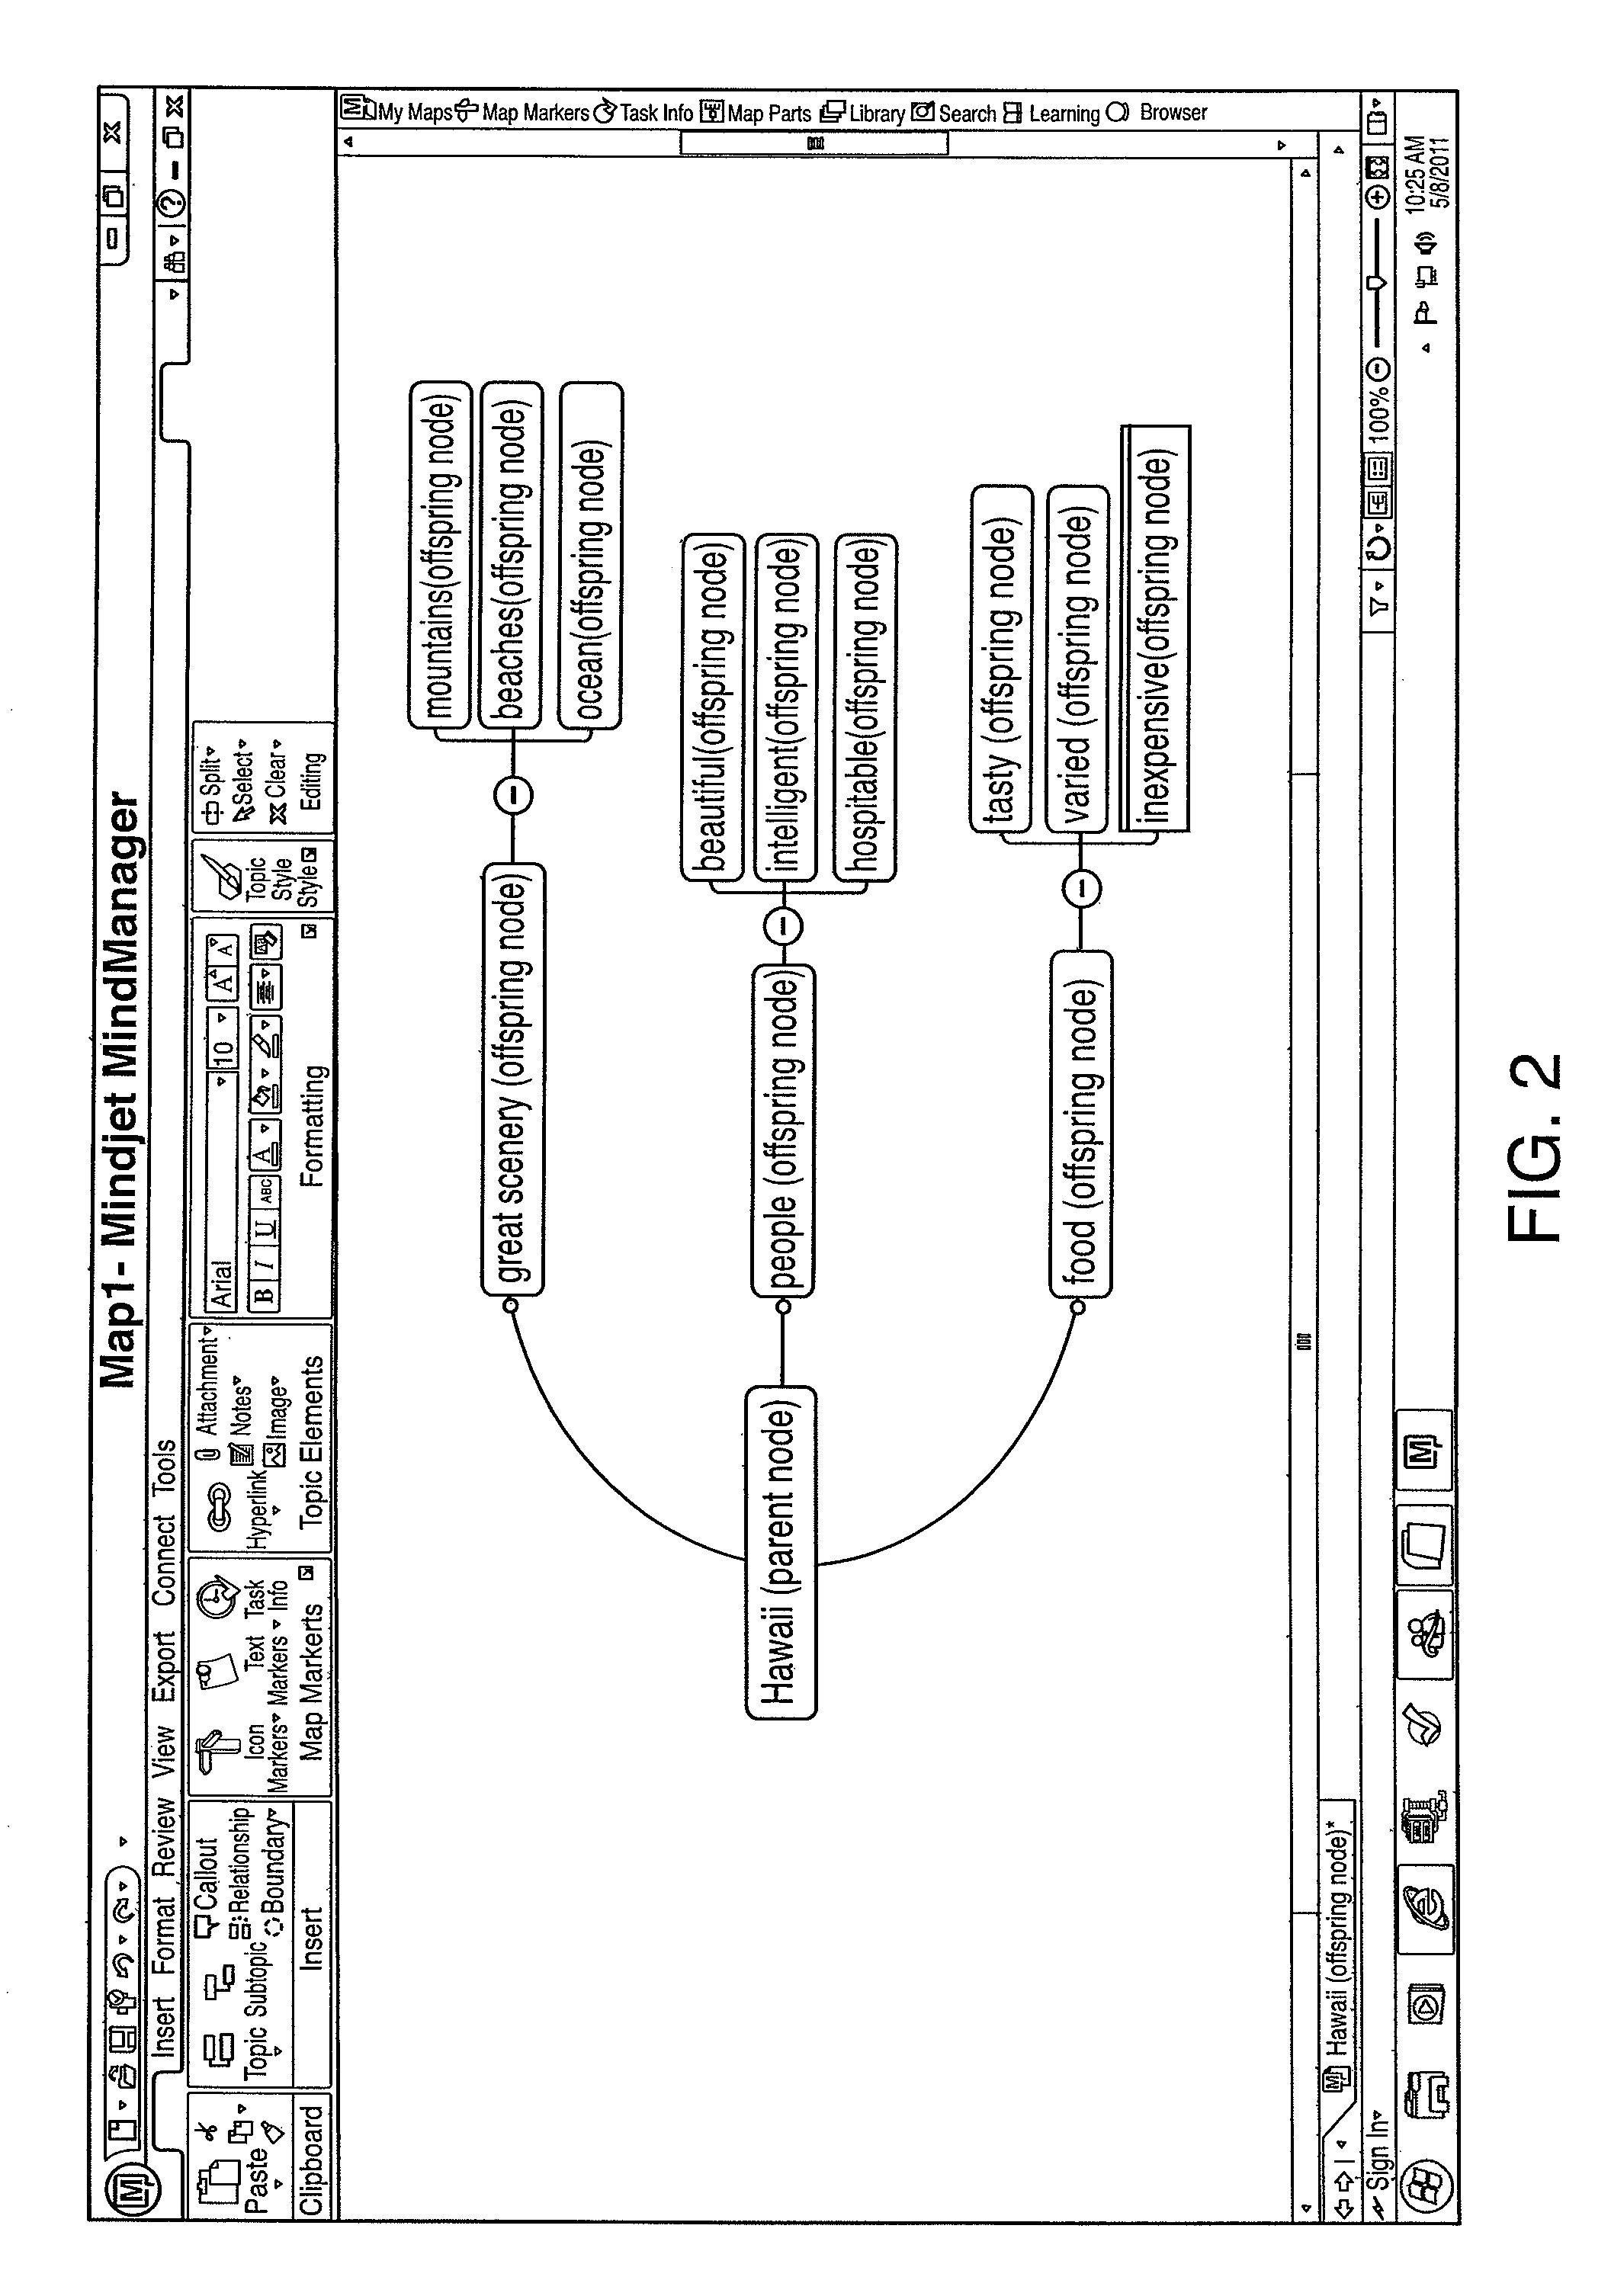 Method for parsing, searching and formatting of text input for visual mapping of knowledge information